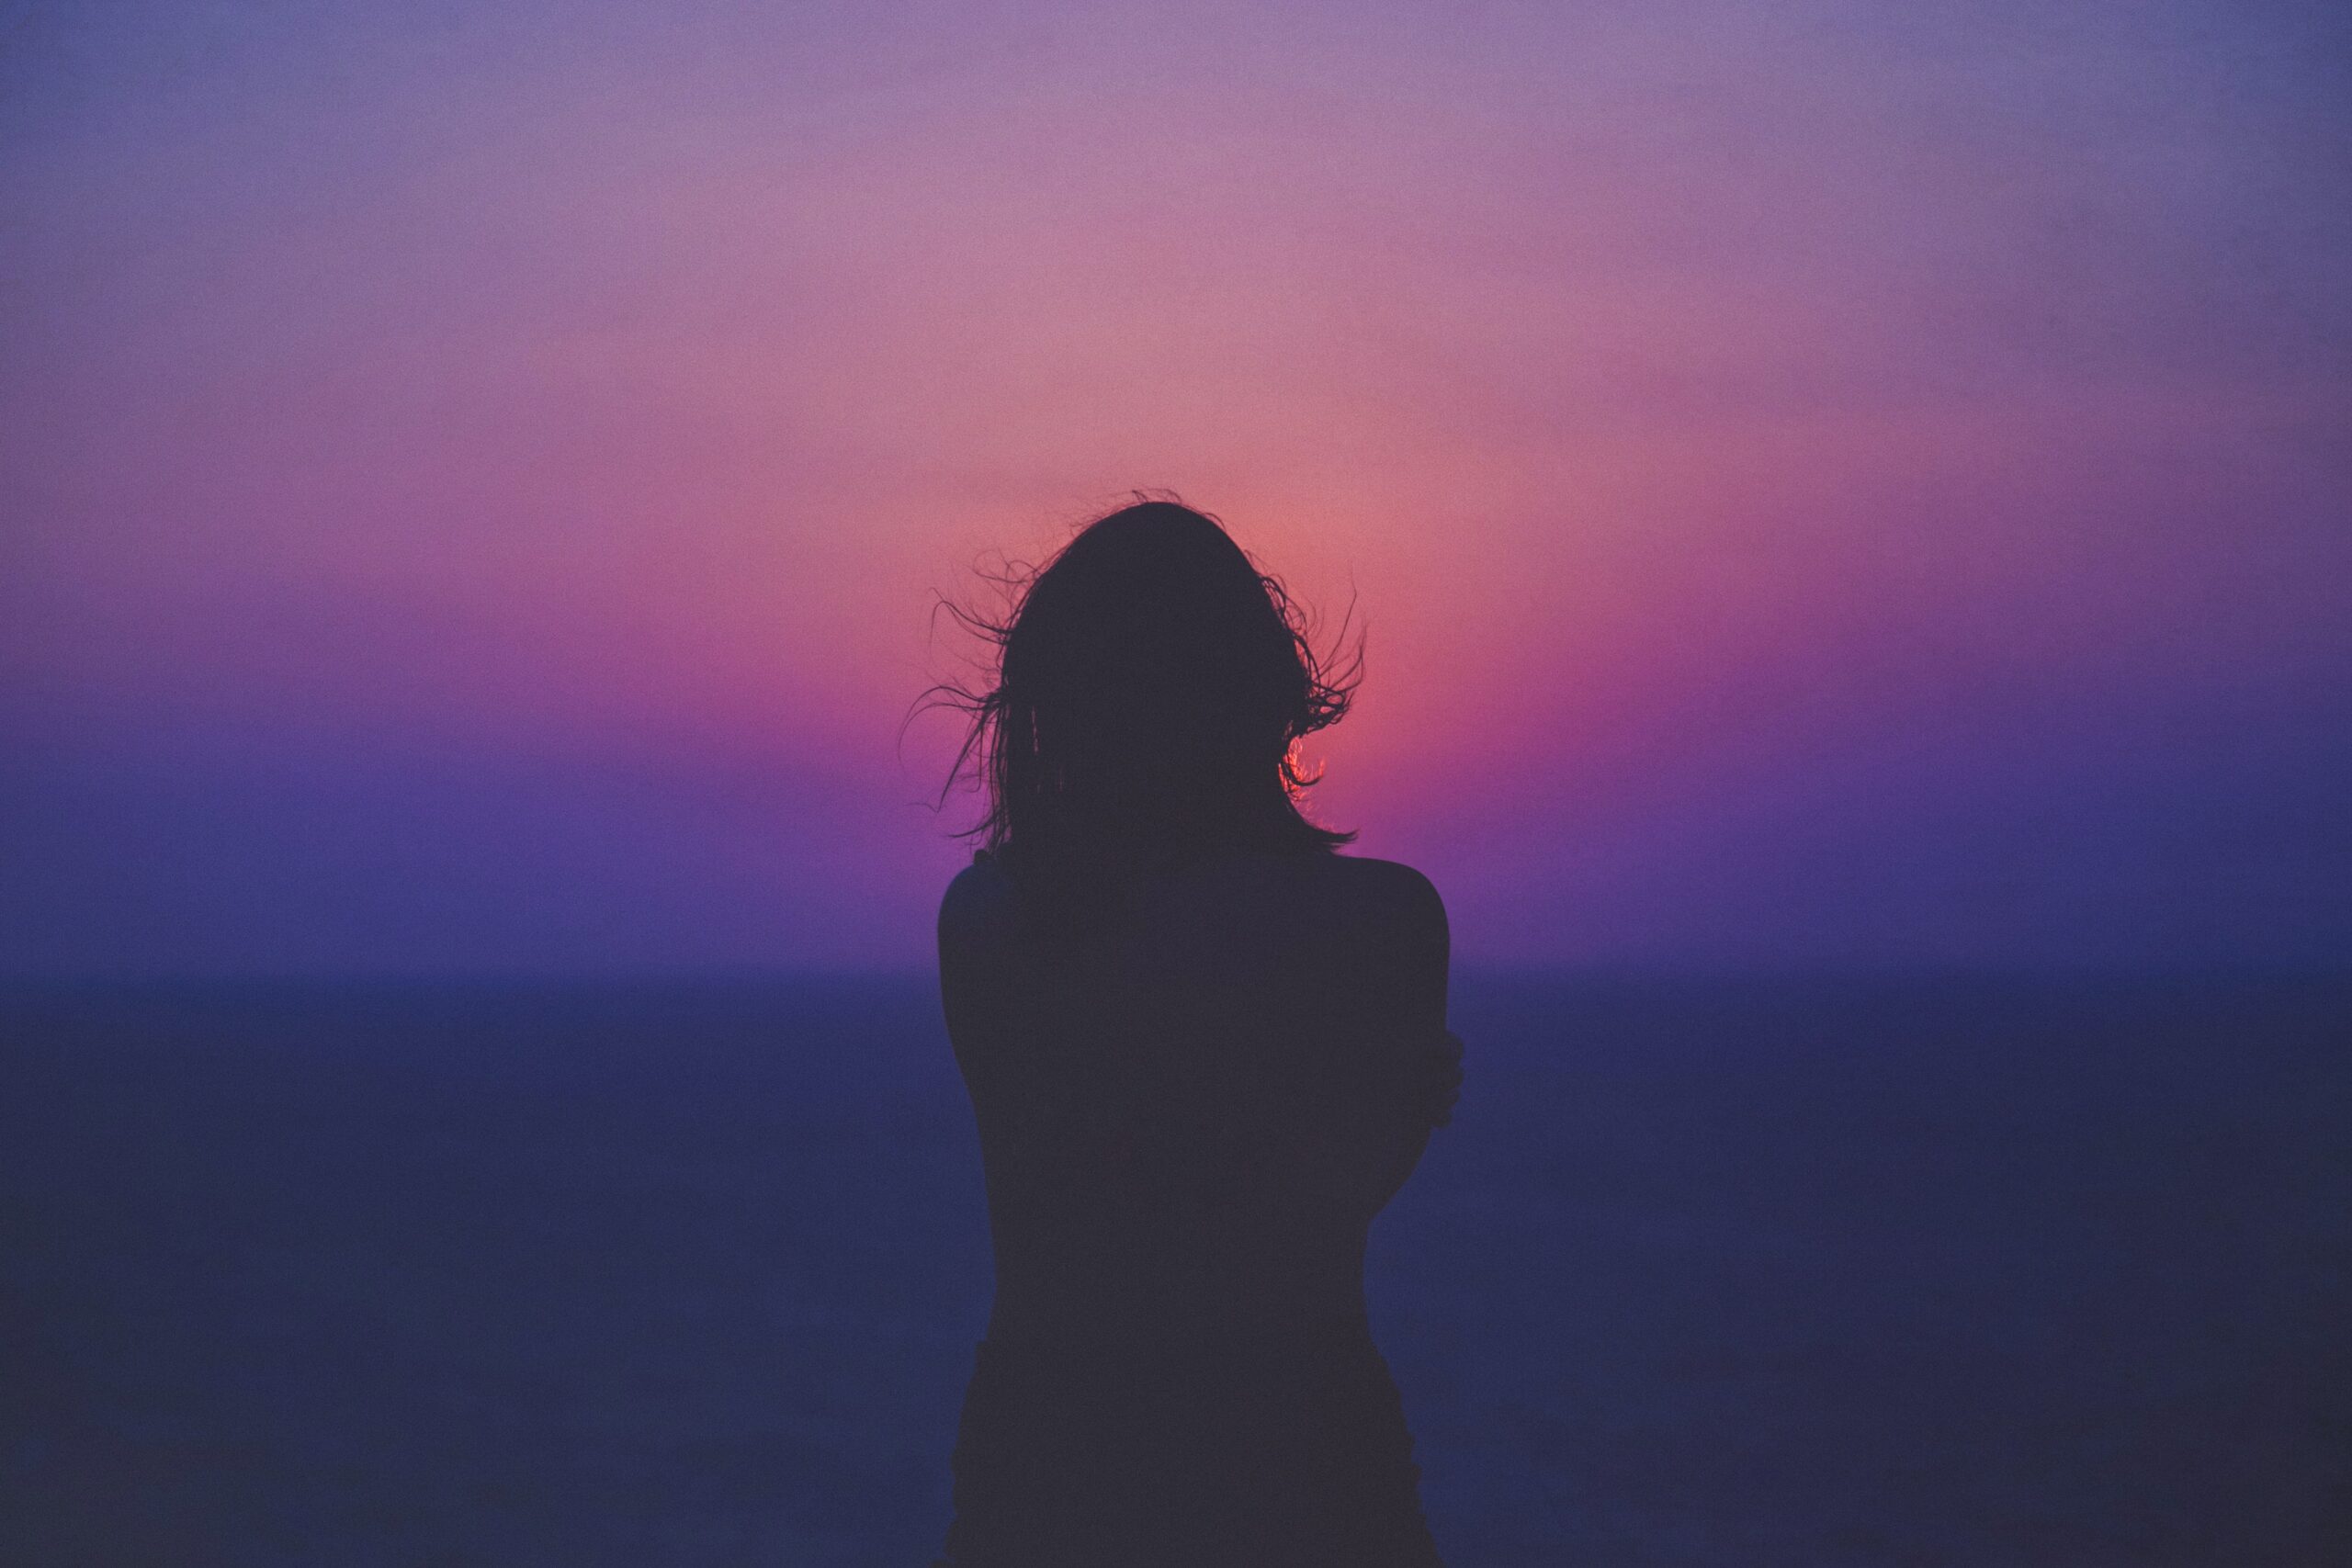 back of a person watching a colorful sunset